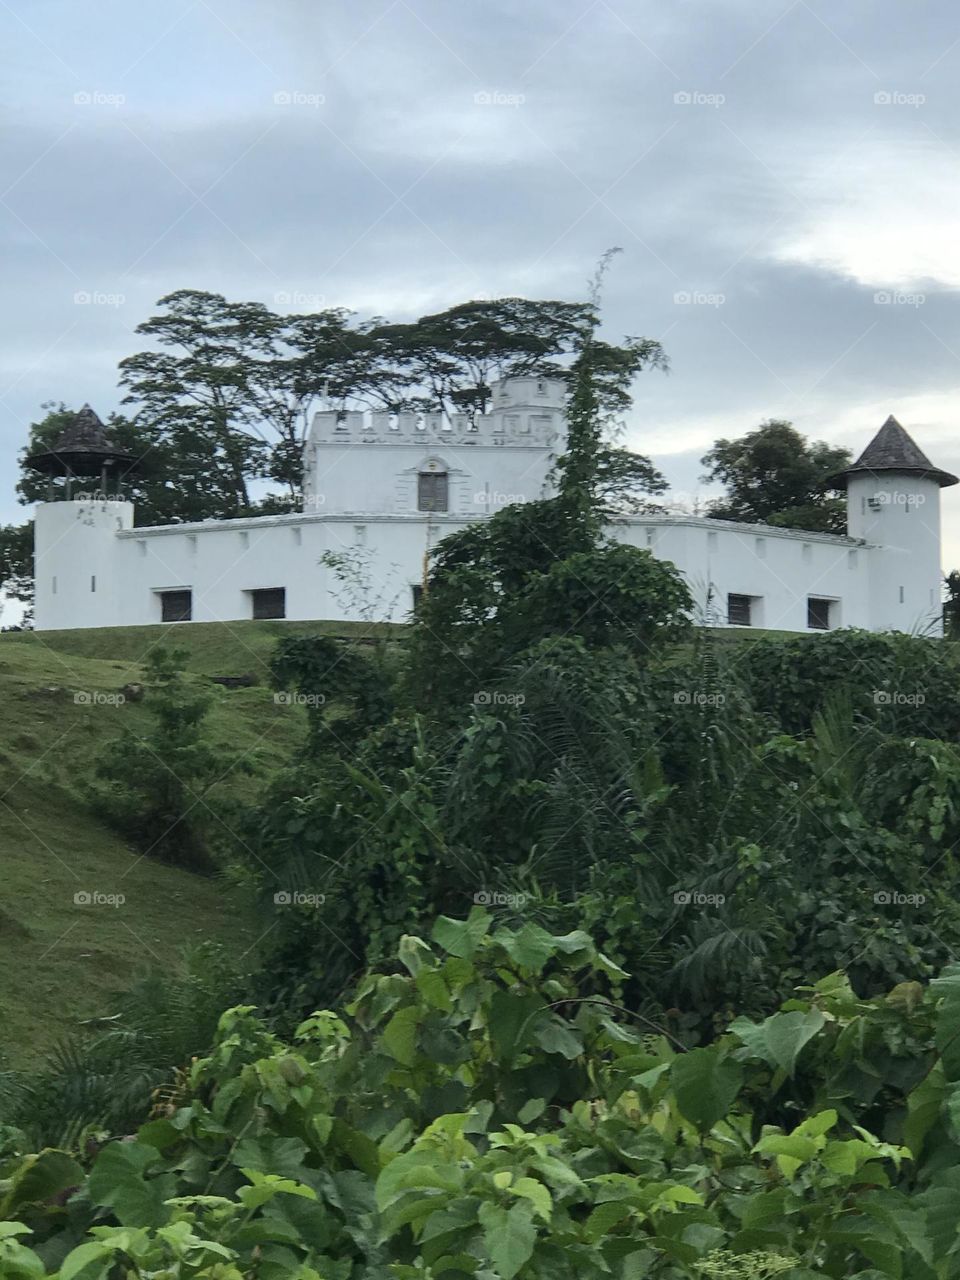 Fort Magherita, a historical building in the heart of Kuching City, Sarawak, Borneo Island. Constructed in 1879 by Charles Brooke to defend Kuching from pirates attacked